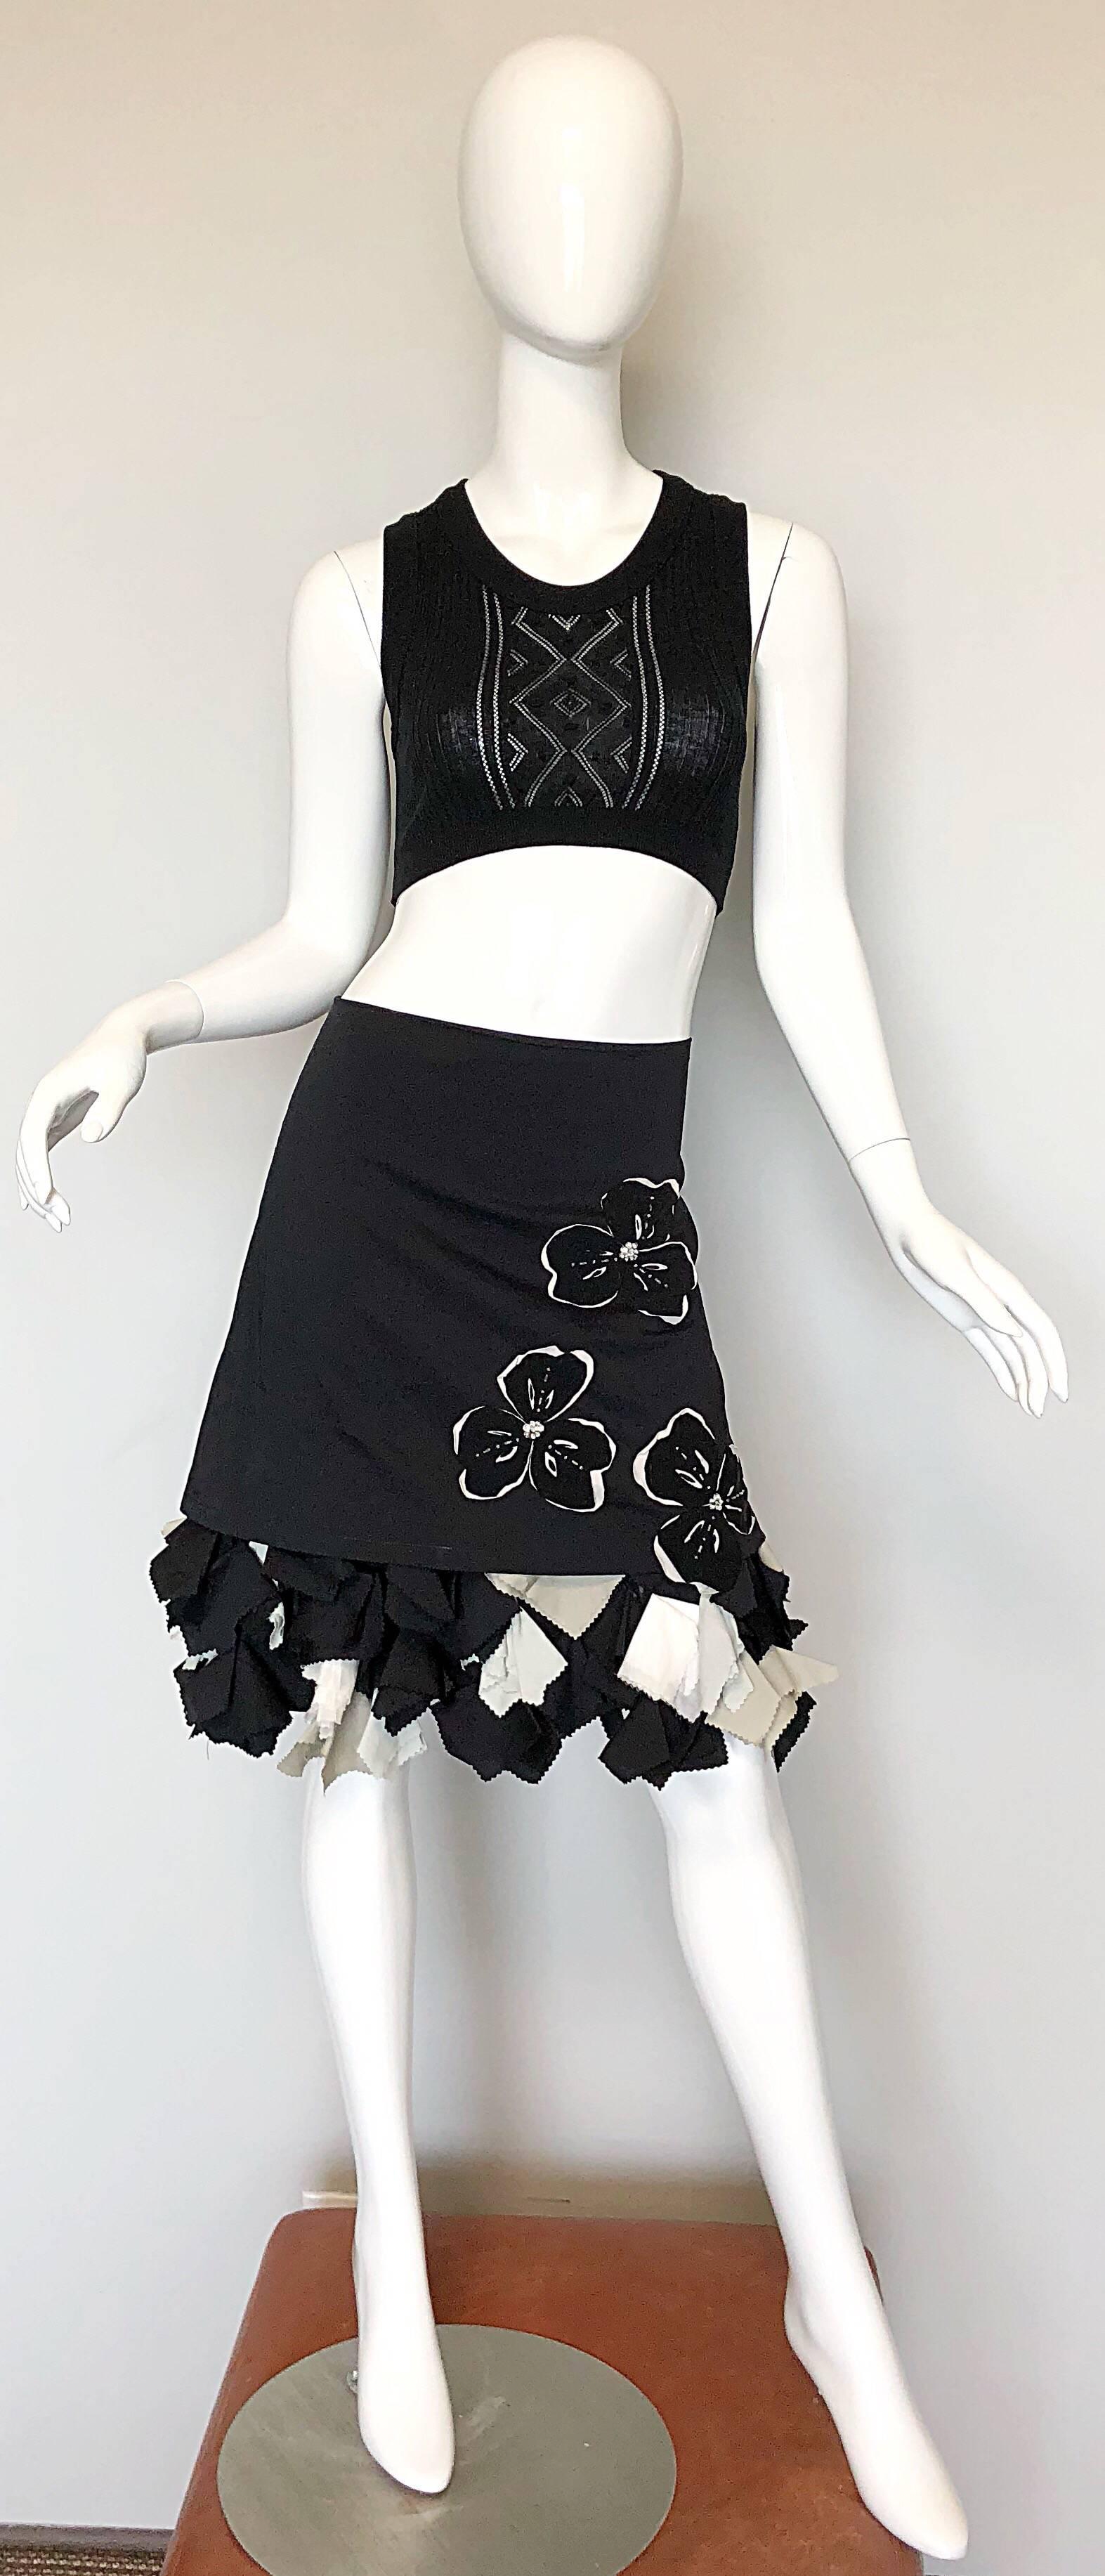 Rare MICHELLE TAN 1990s black and white origami rhinestone skirt! Features a cotton overlay mini skirt over an attached origami encrusted longer skirt. Overlay features flower appliqués with rhinestones throughout. Hidden zipper up the back with